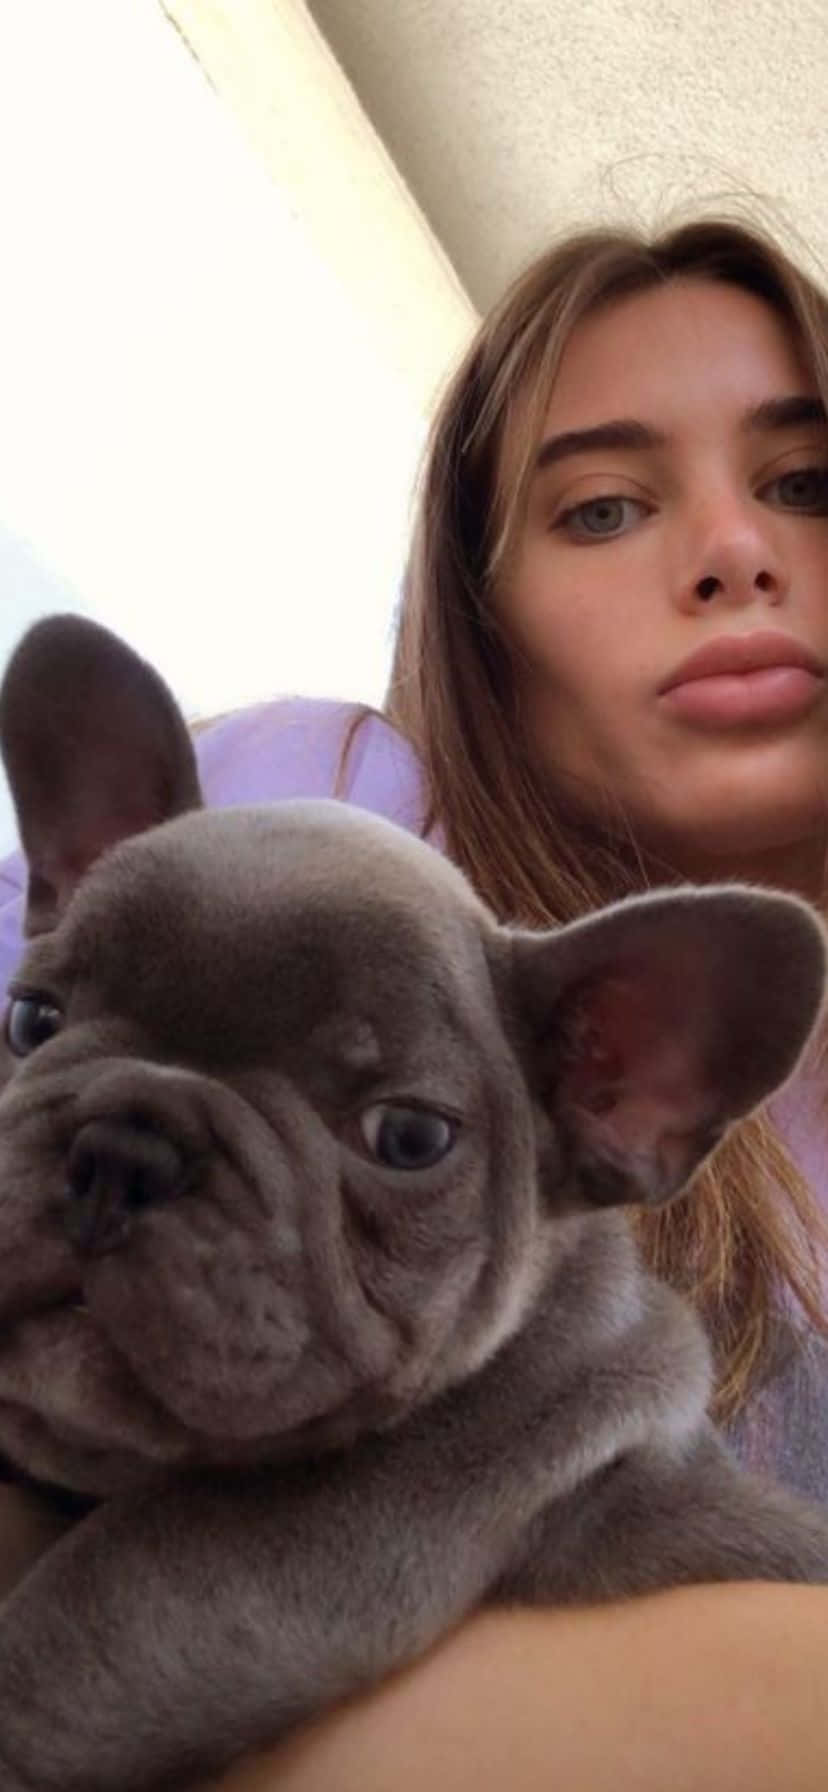 Womanand French Bulldog Selfie Wallpaper